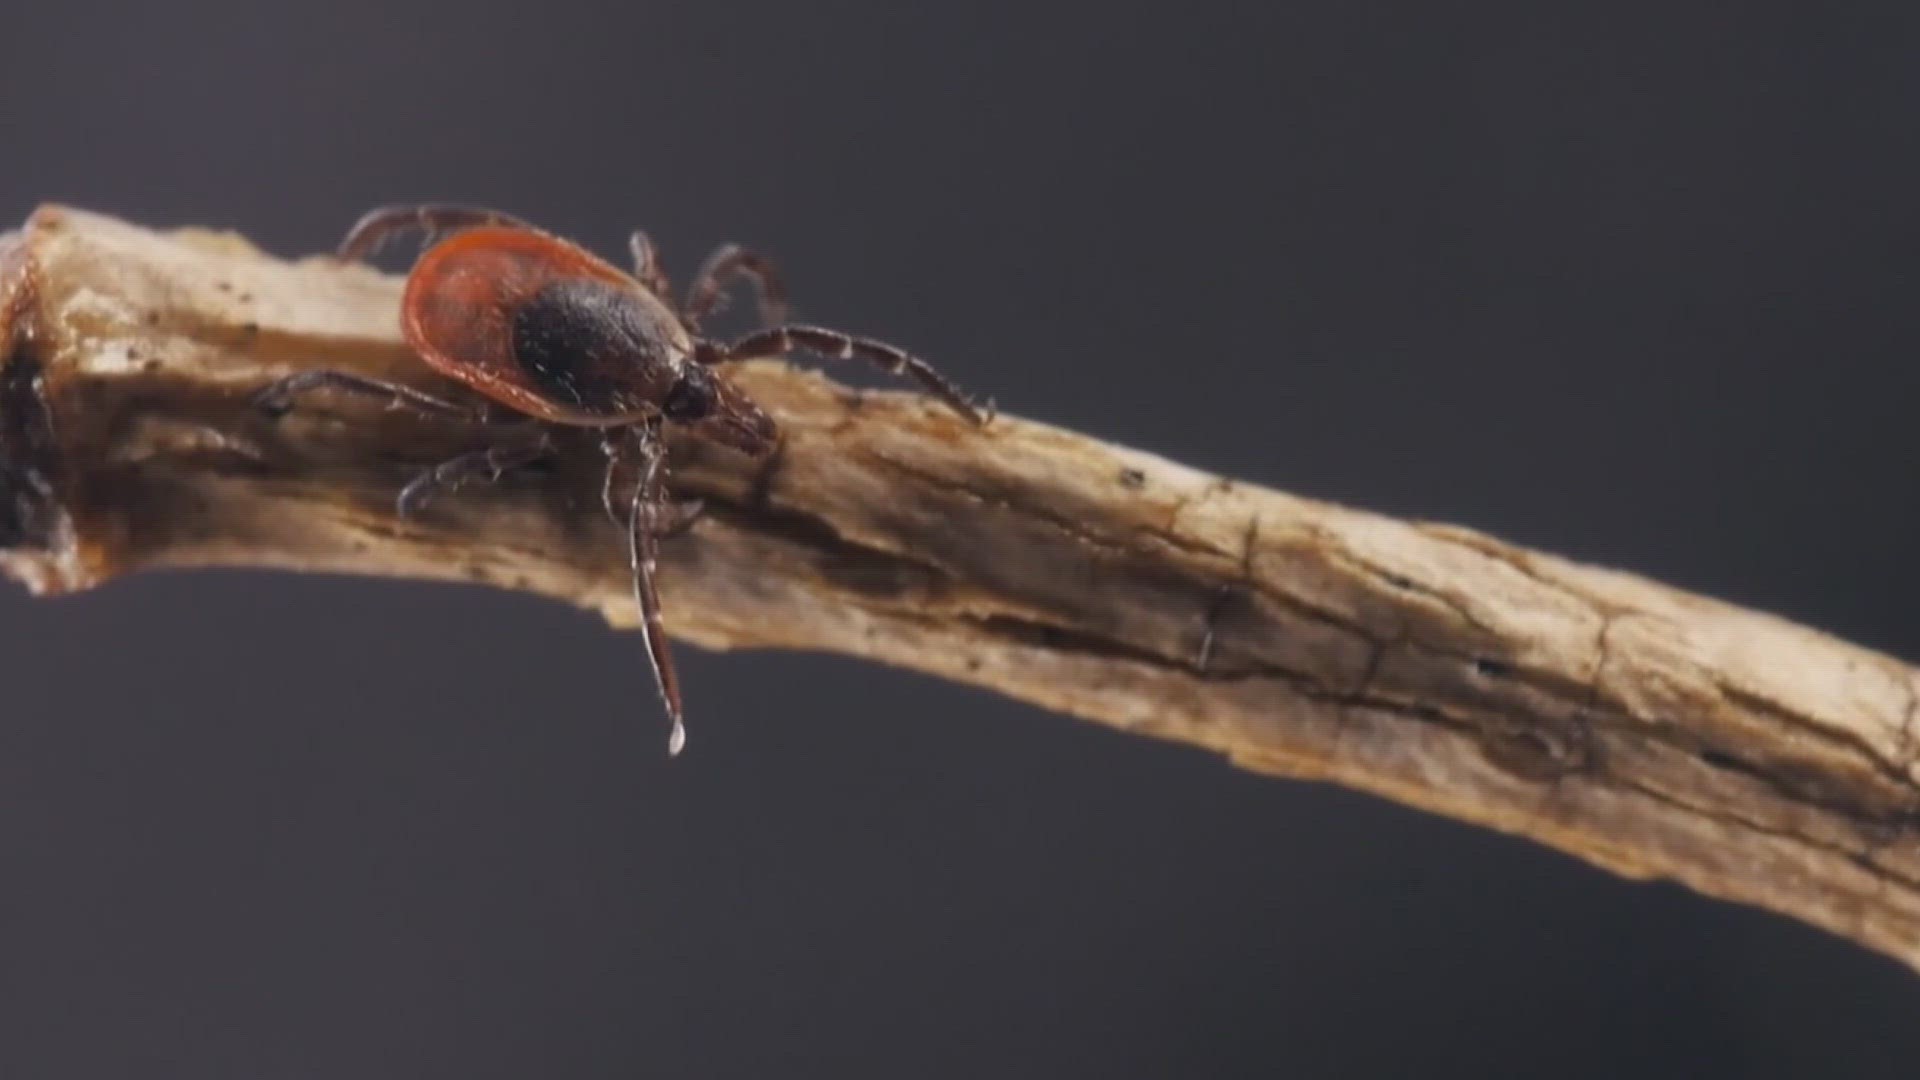 Experts say recent snow and ice will have little impact as more ticks expand into new areas.